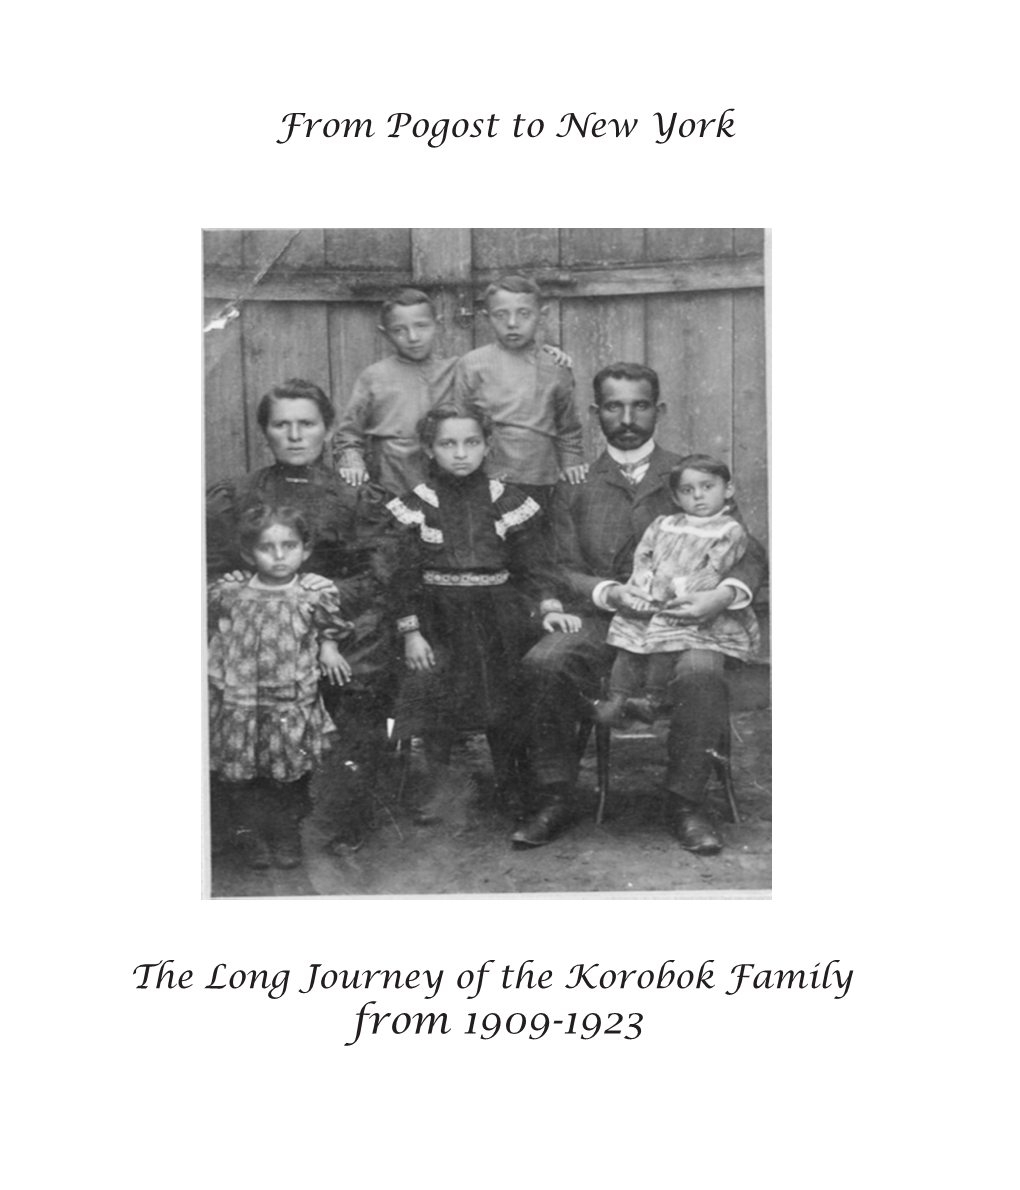 The Journey of the Korobok Family, from Accounts of Family History, Both Recorded and Oral, from Genealogy Research and from Other Sources